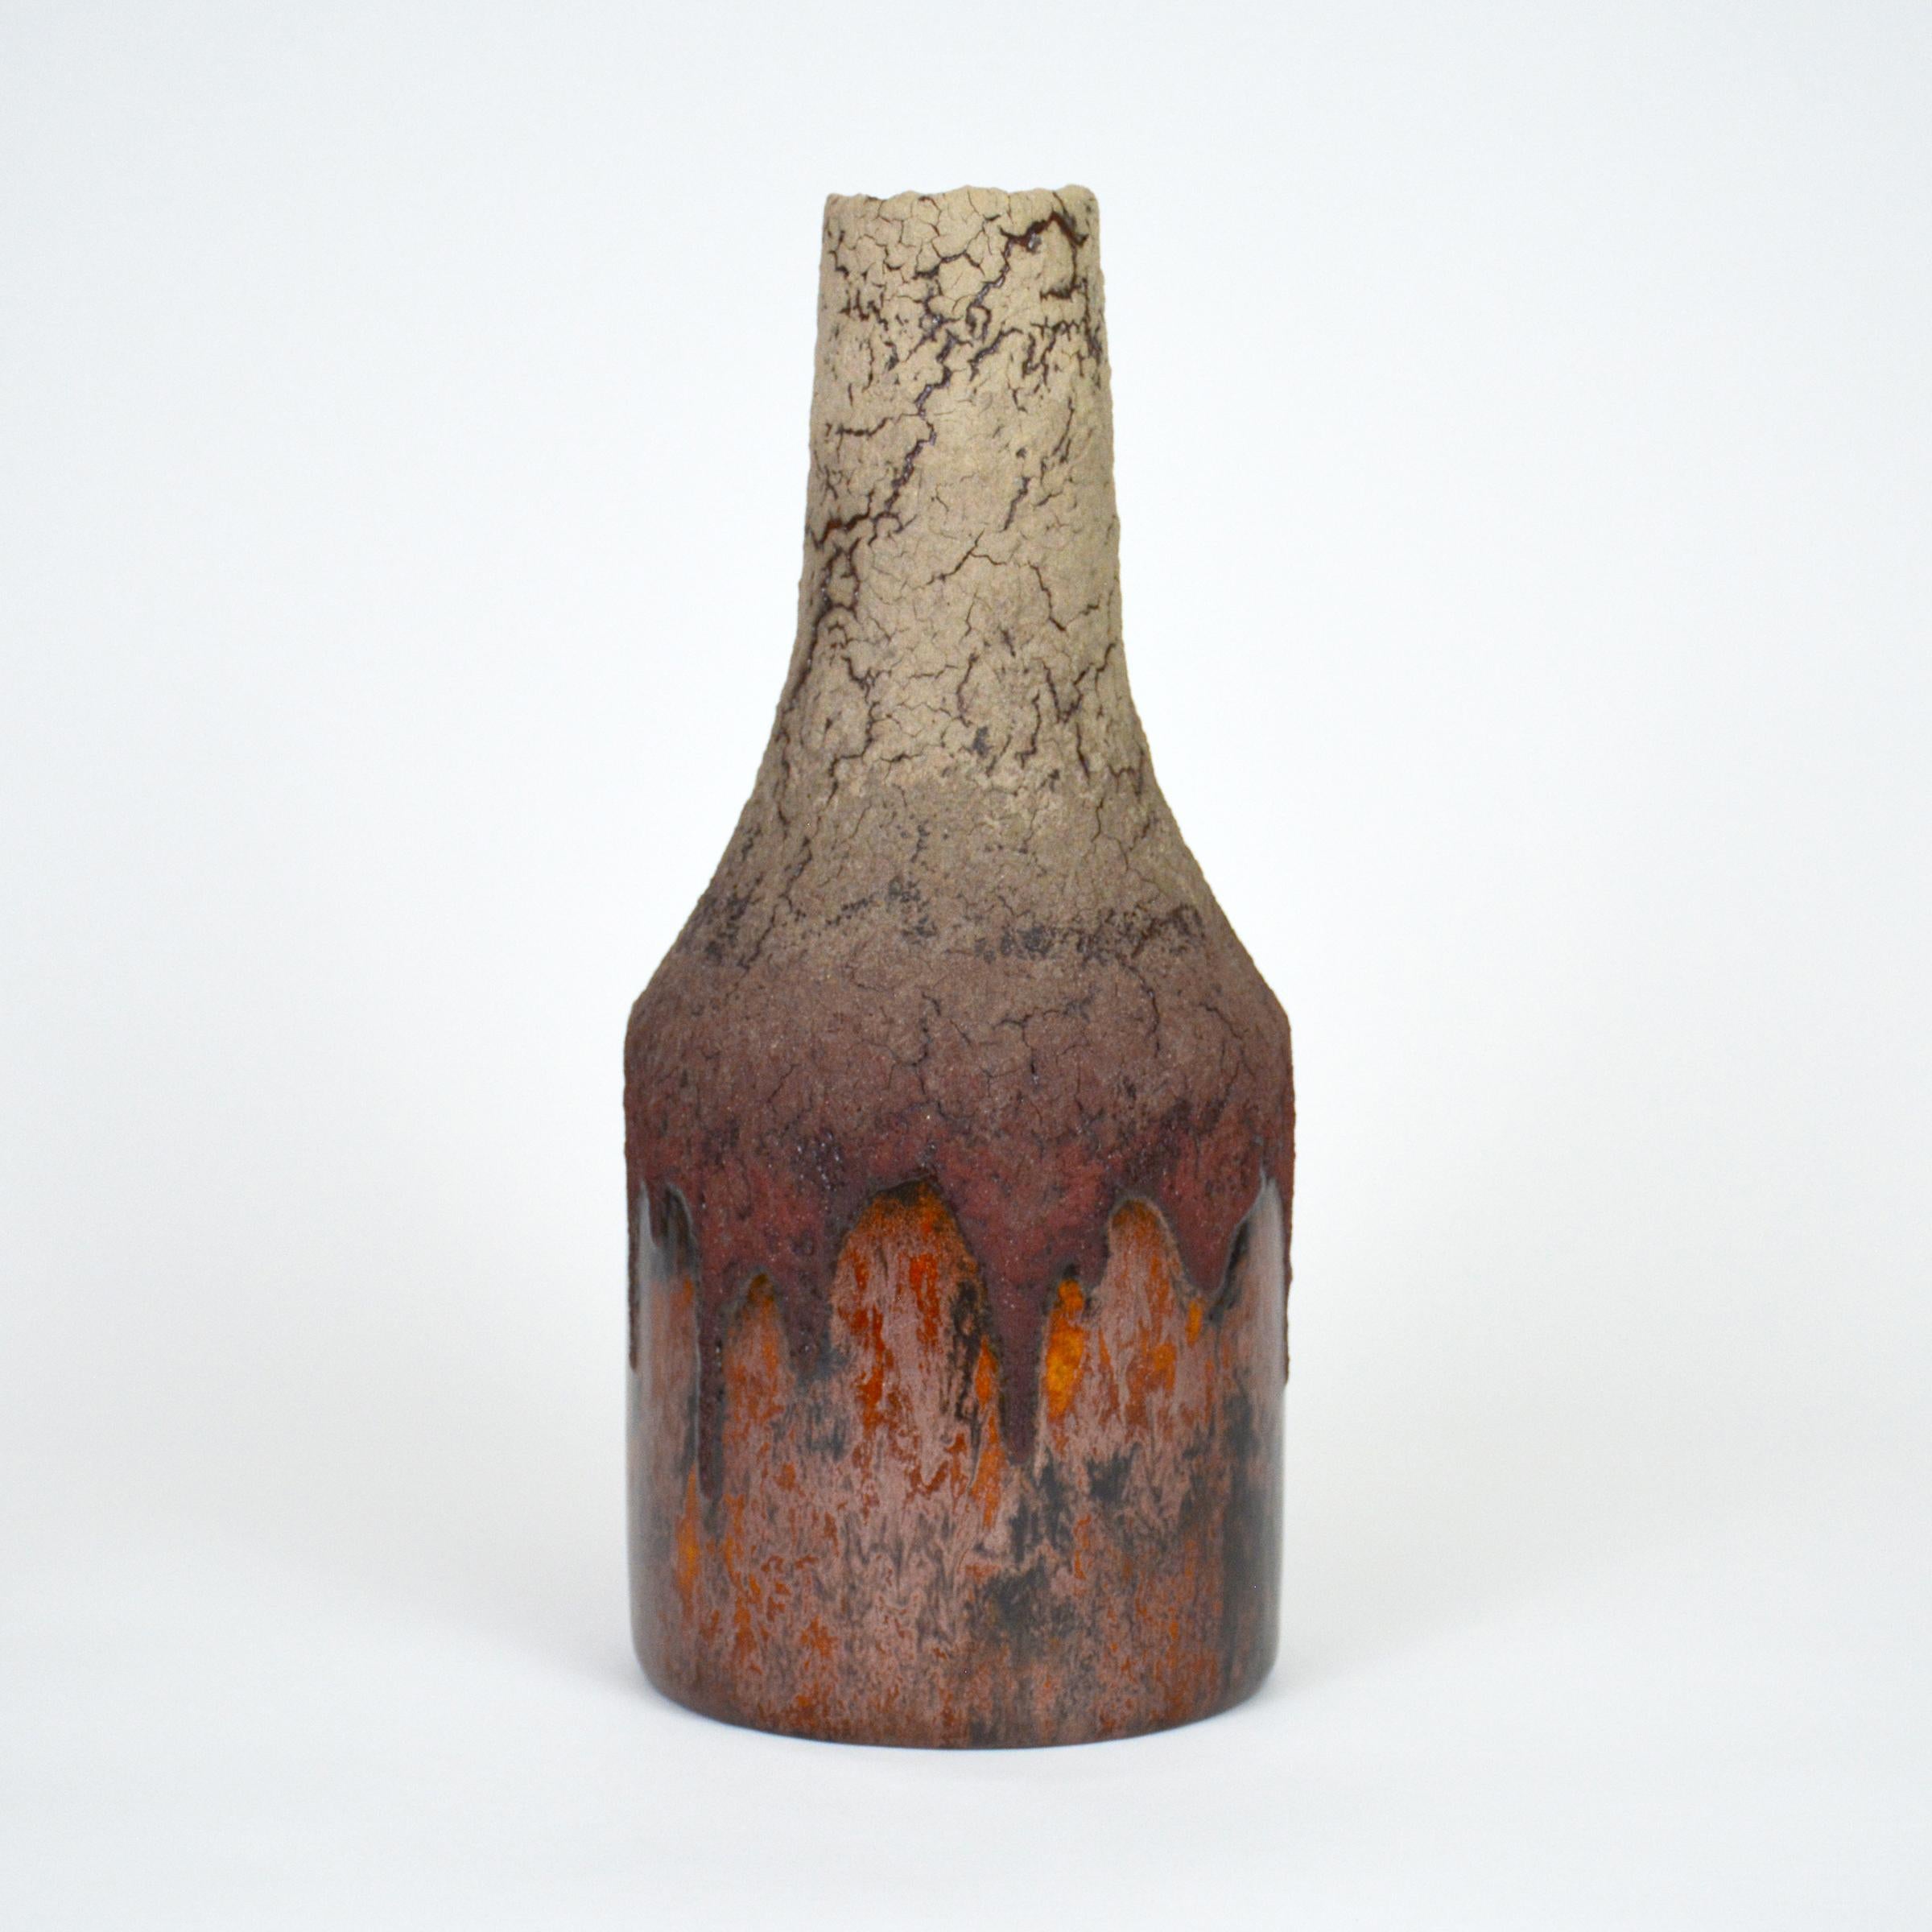 Ceramic bottle by William Edwards
Hand built earthenware decorative bottle, fired multiple times to achieve a textured surface of random abstraction, taupe to burgundy matte with dark amber gloss microcrystalline glaze that sparkles in certain